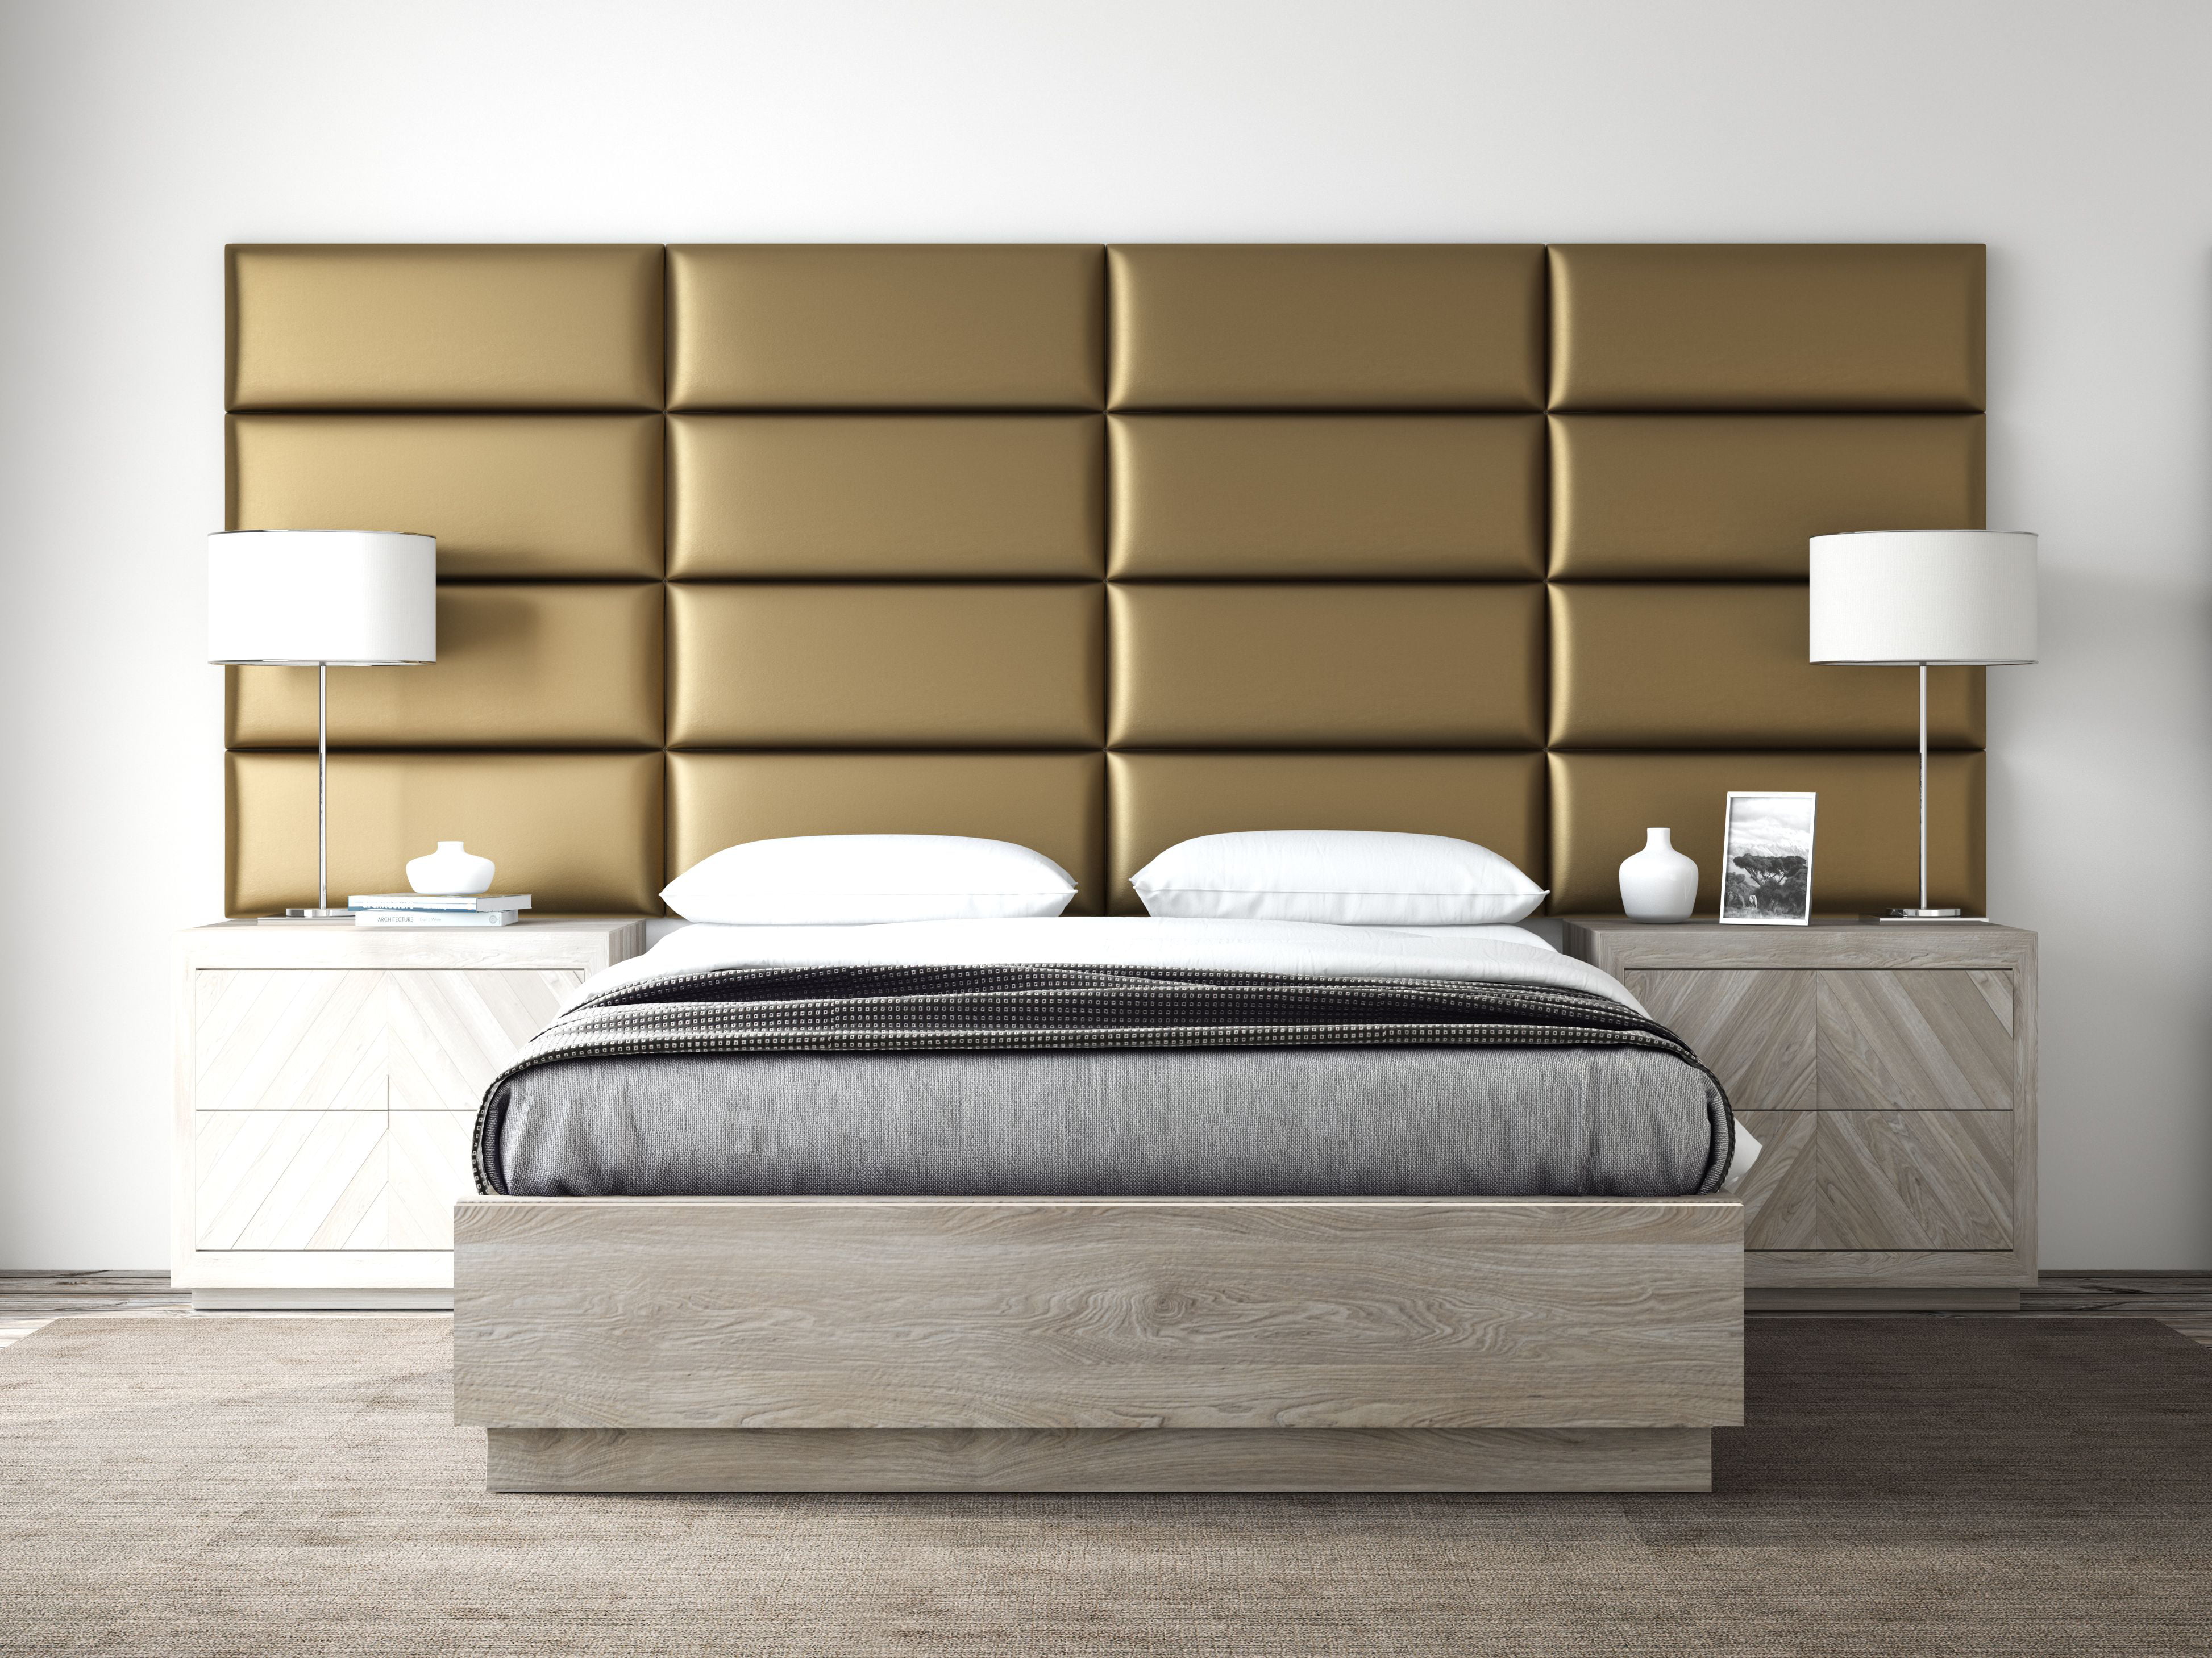 Monterey Upholstered Headboards - Accent Wall Panels - Packs Of 4 ...